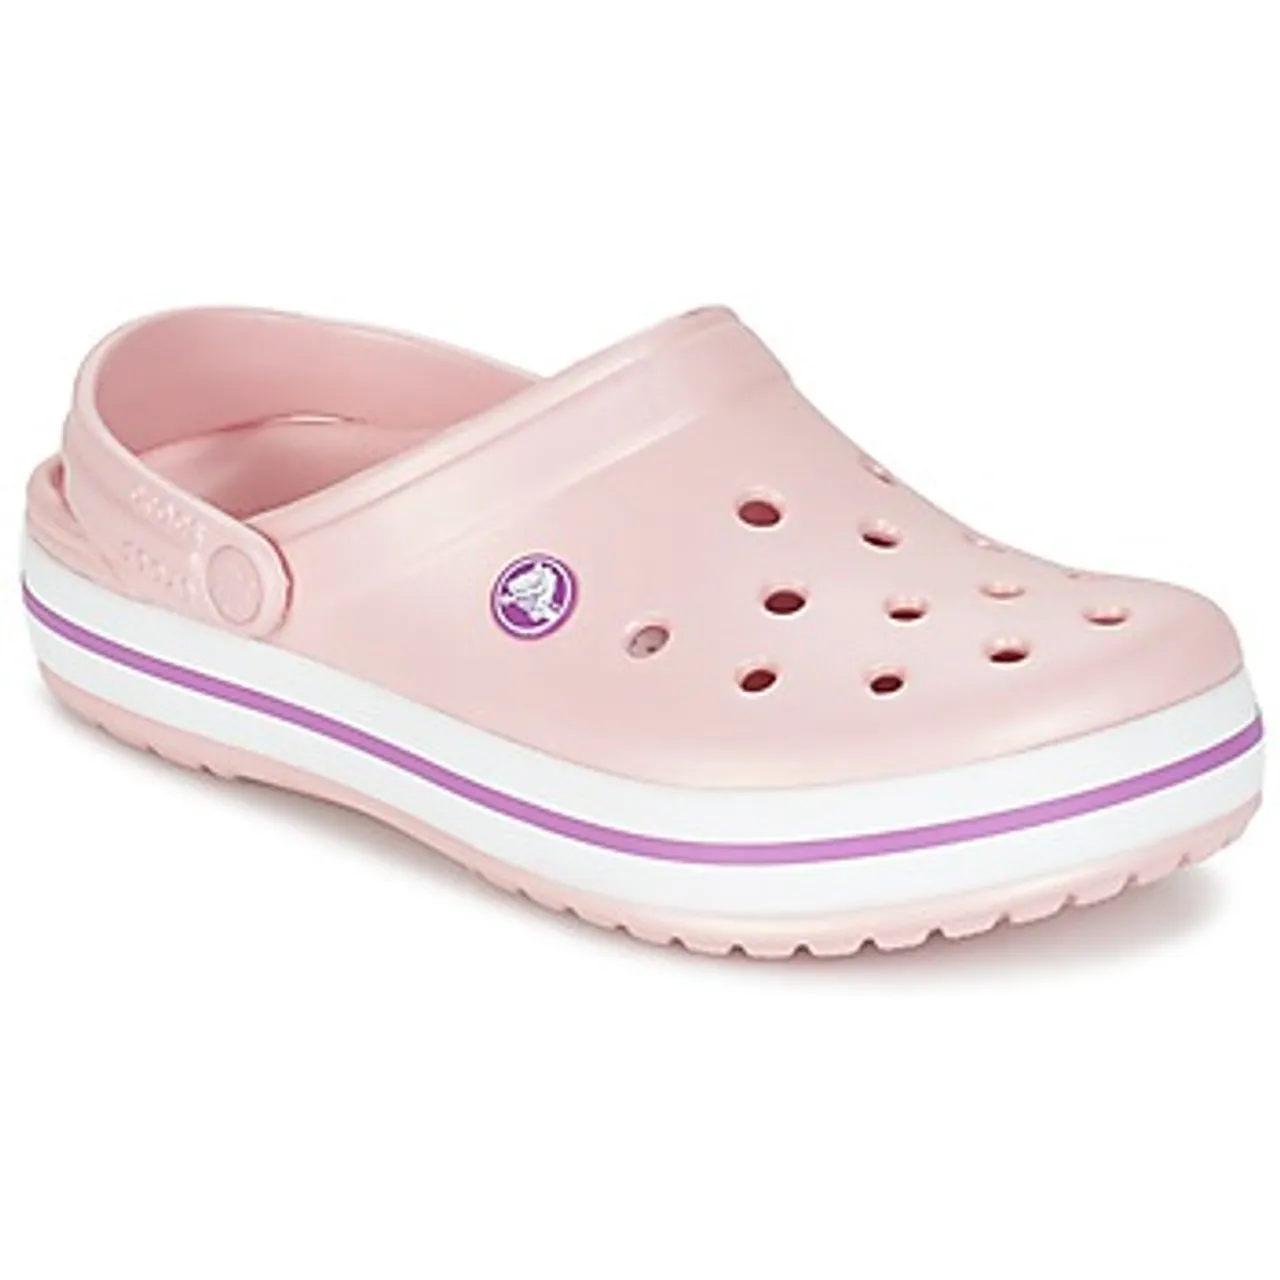 Crocs  CROCBAND  women's Clogs (Shoes) in Pink